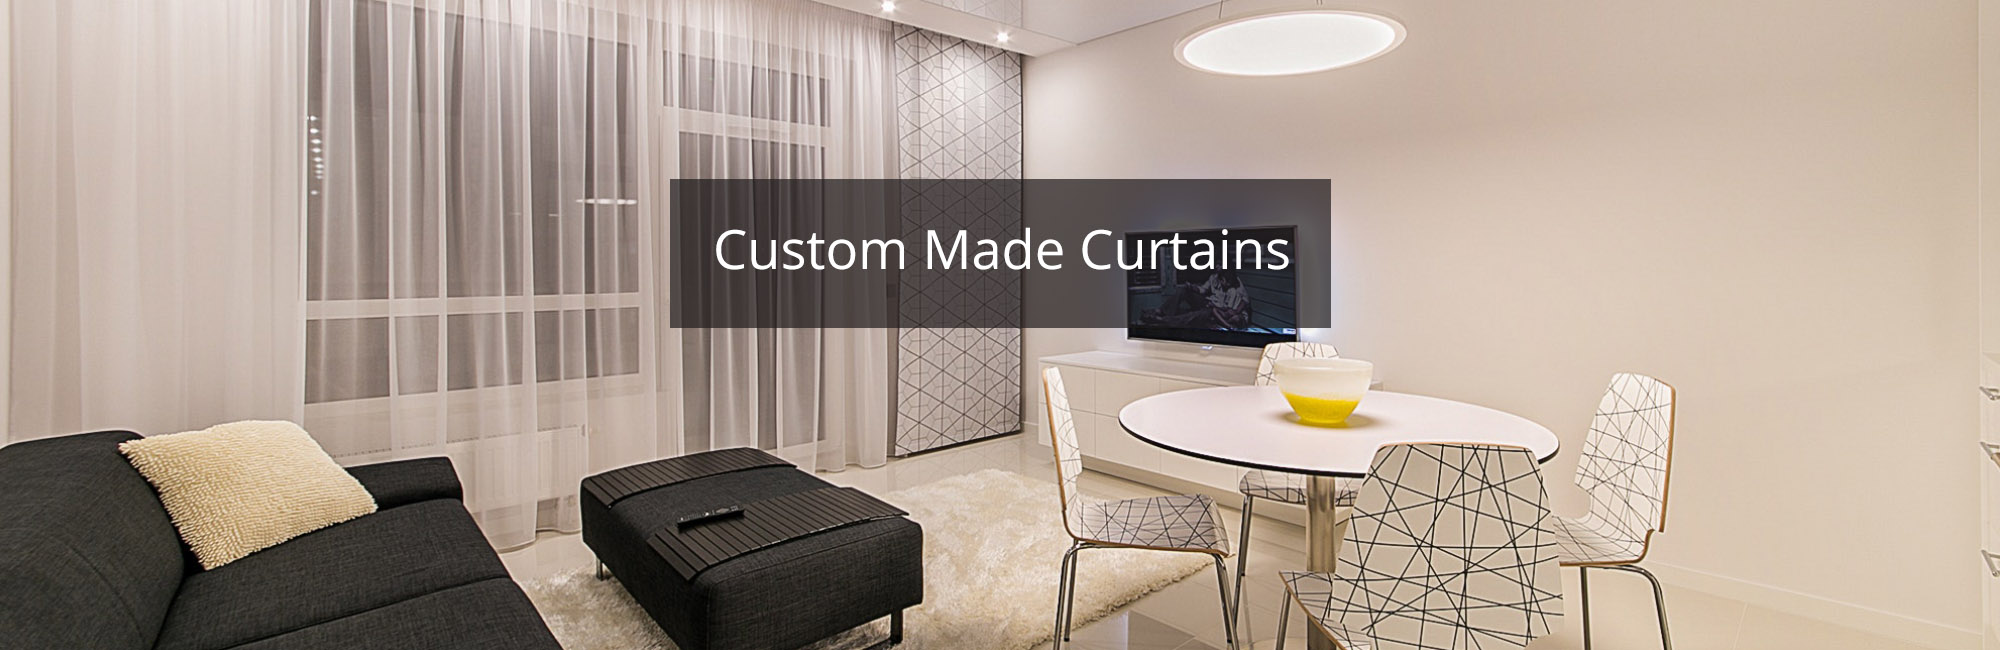 Custom Made Curtains by Curtain Trend Gold Coast and Brisbane - home New